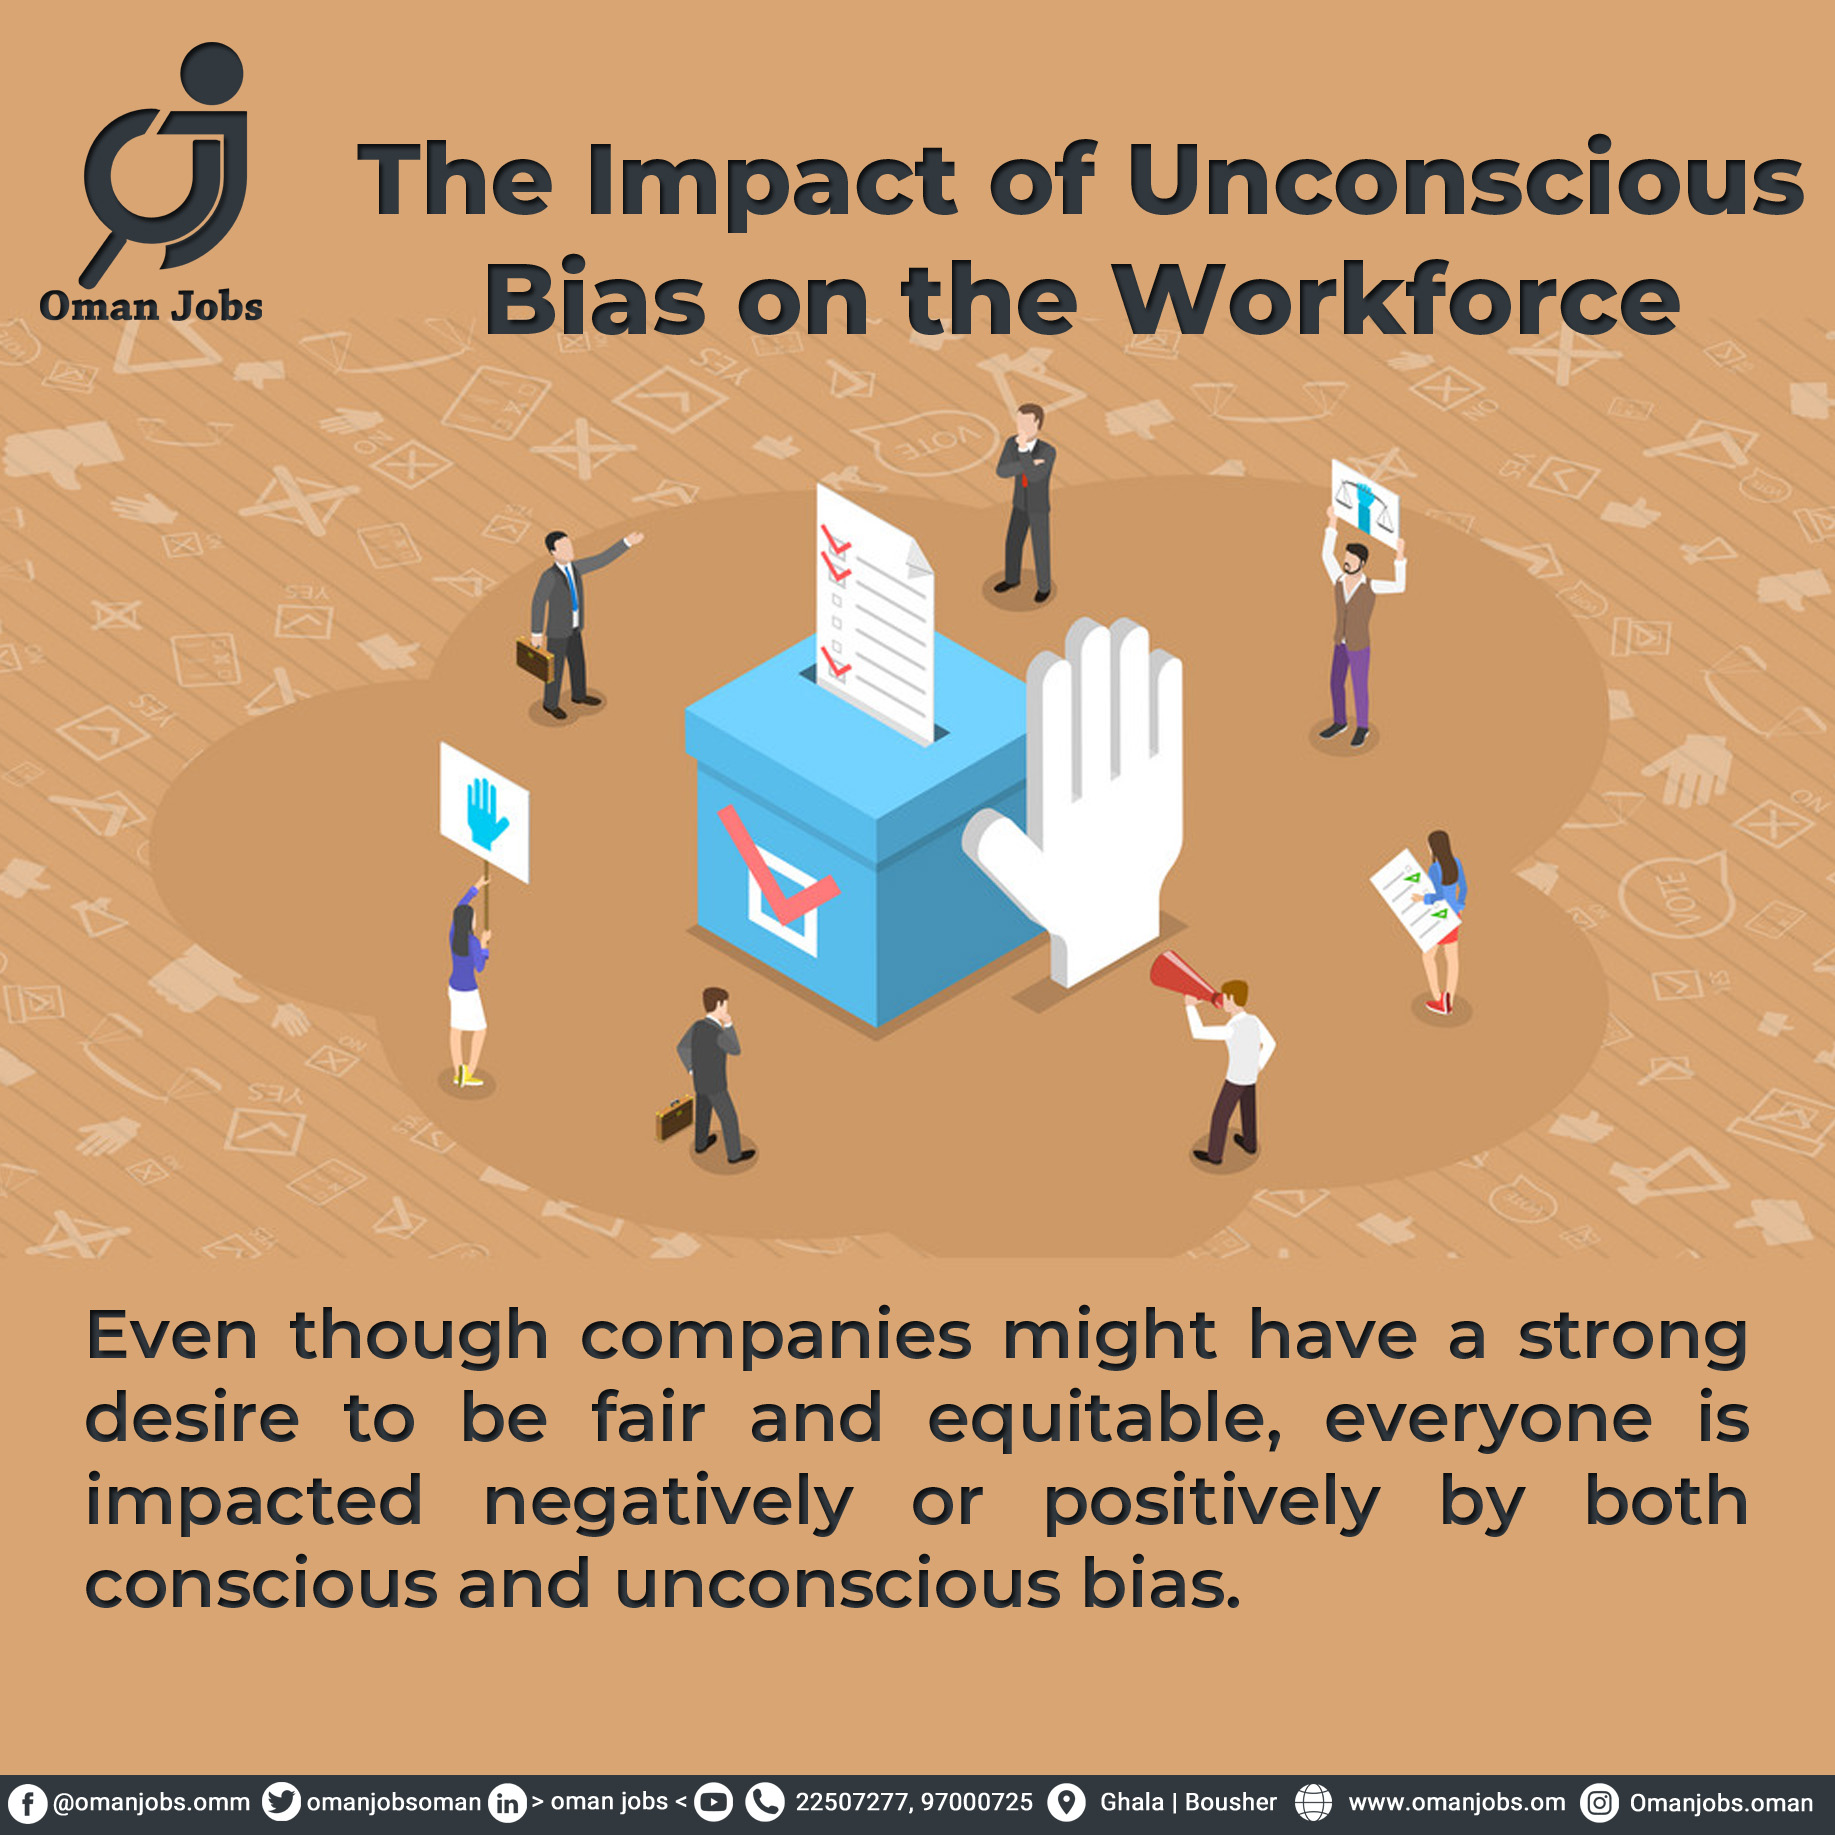 The Impact of Unconscious Bias on the Workforce